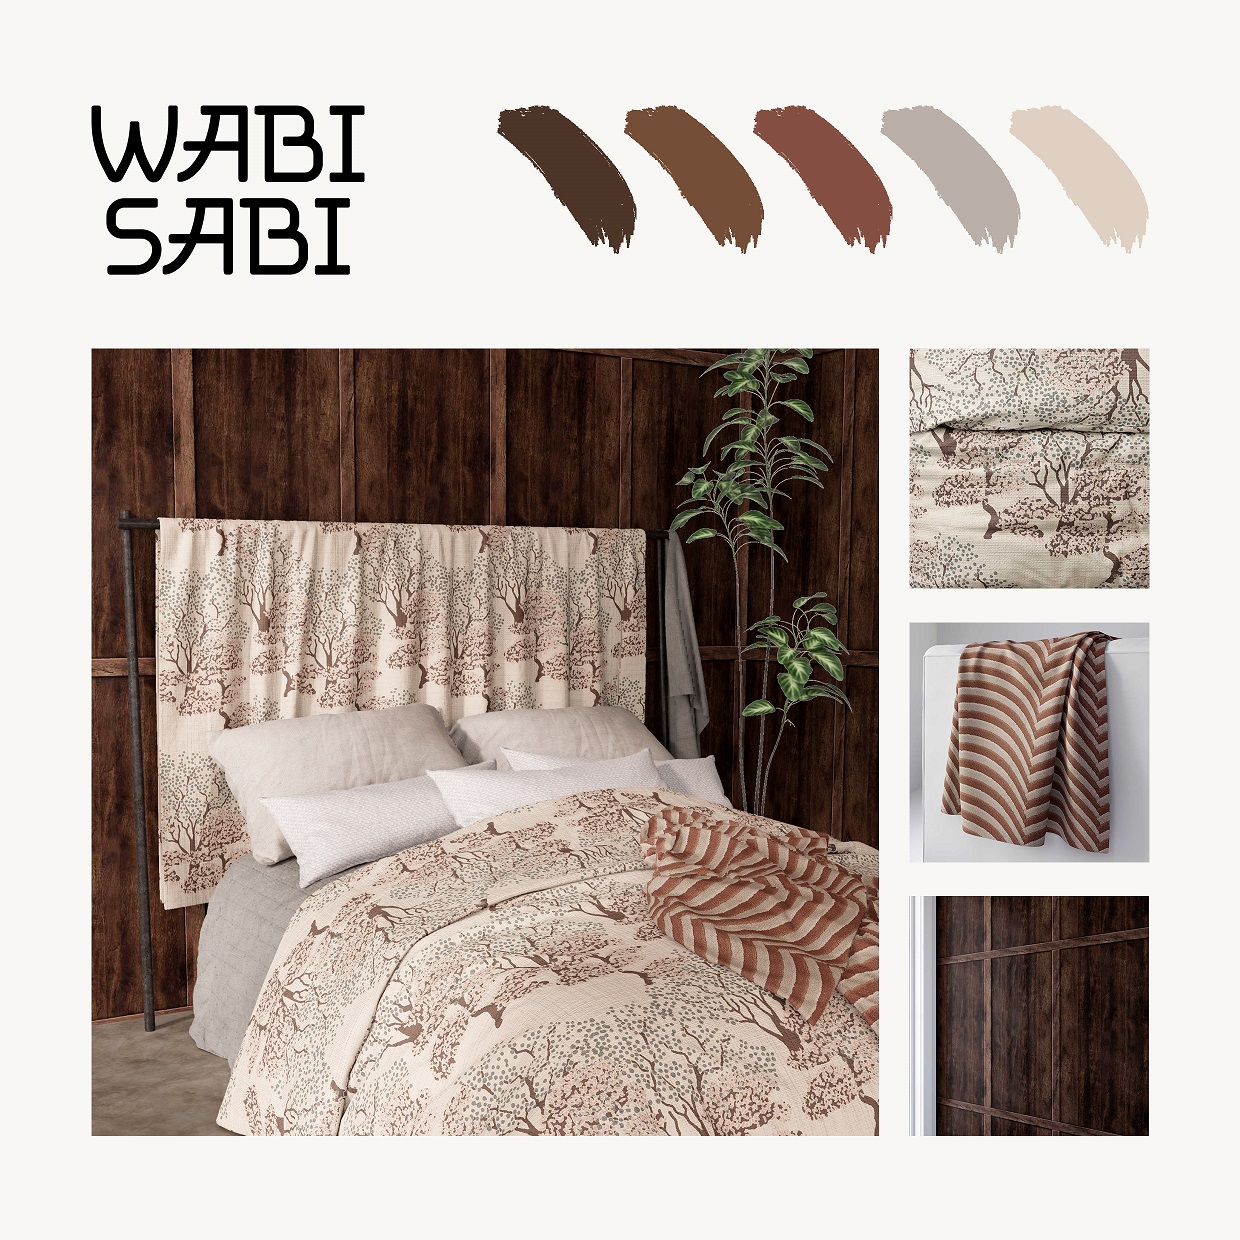 a bedroom design inspired by the wabi sabi style